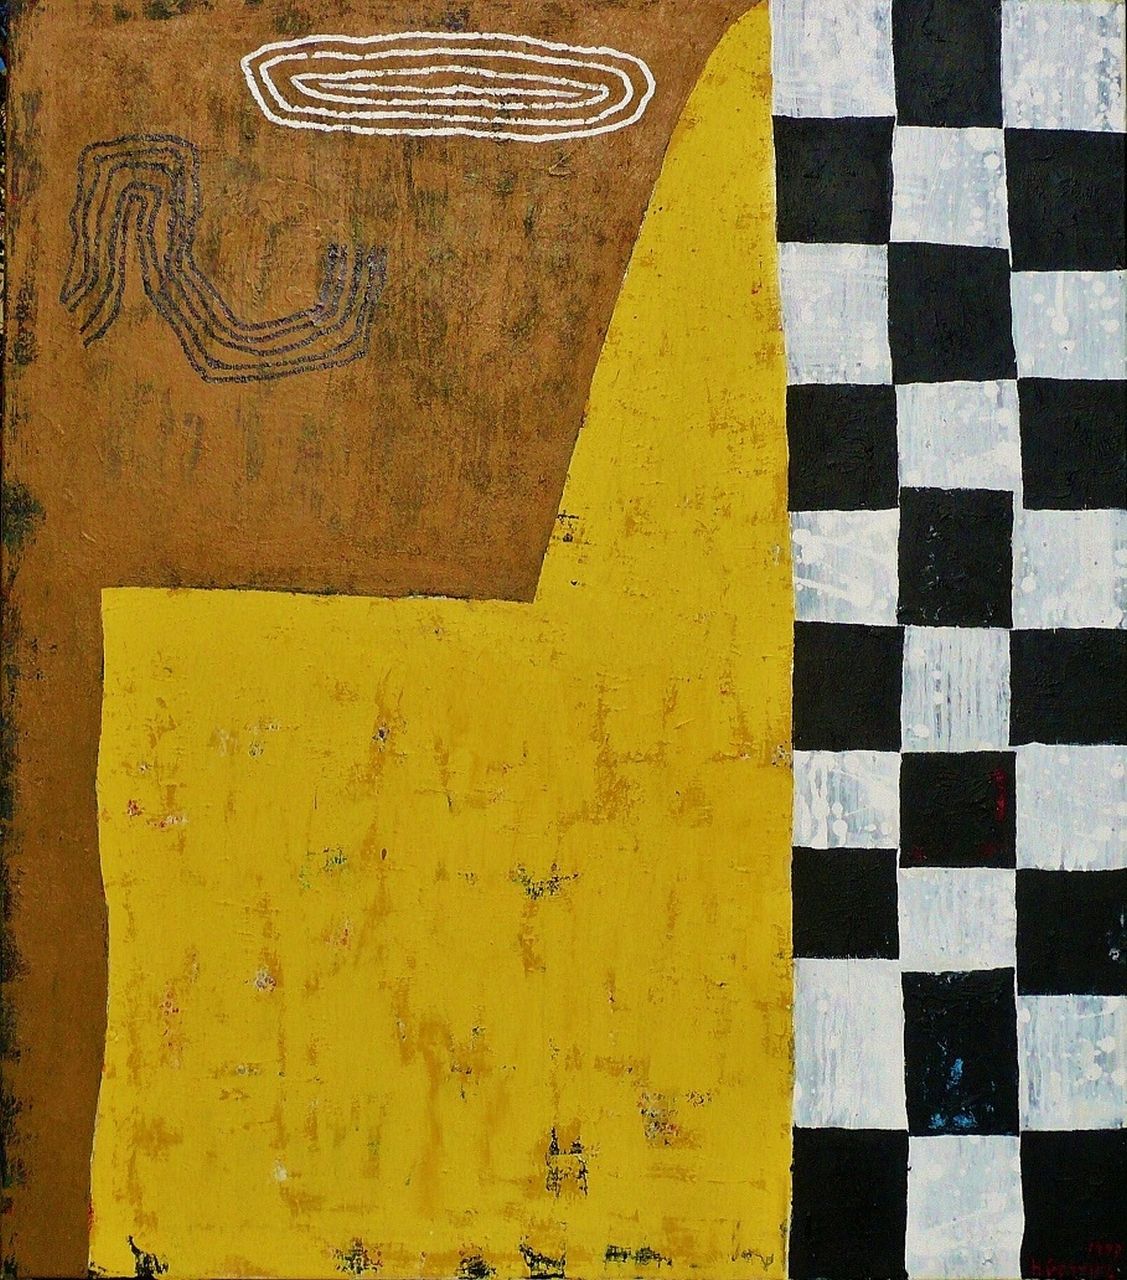 Harrie A. Gerritz | Yellow chapel, oil on canvas, 160.0 x 140.0 cm, signed l.r. and dated 1999